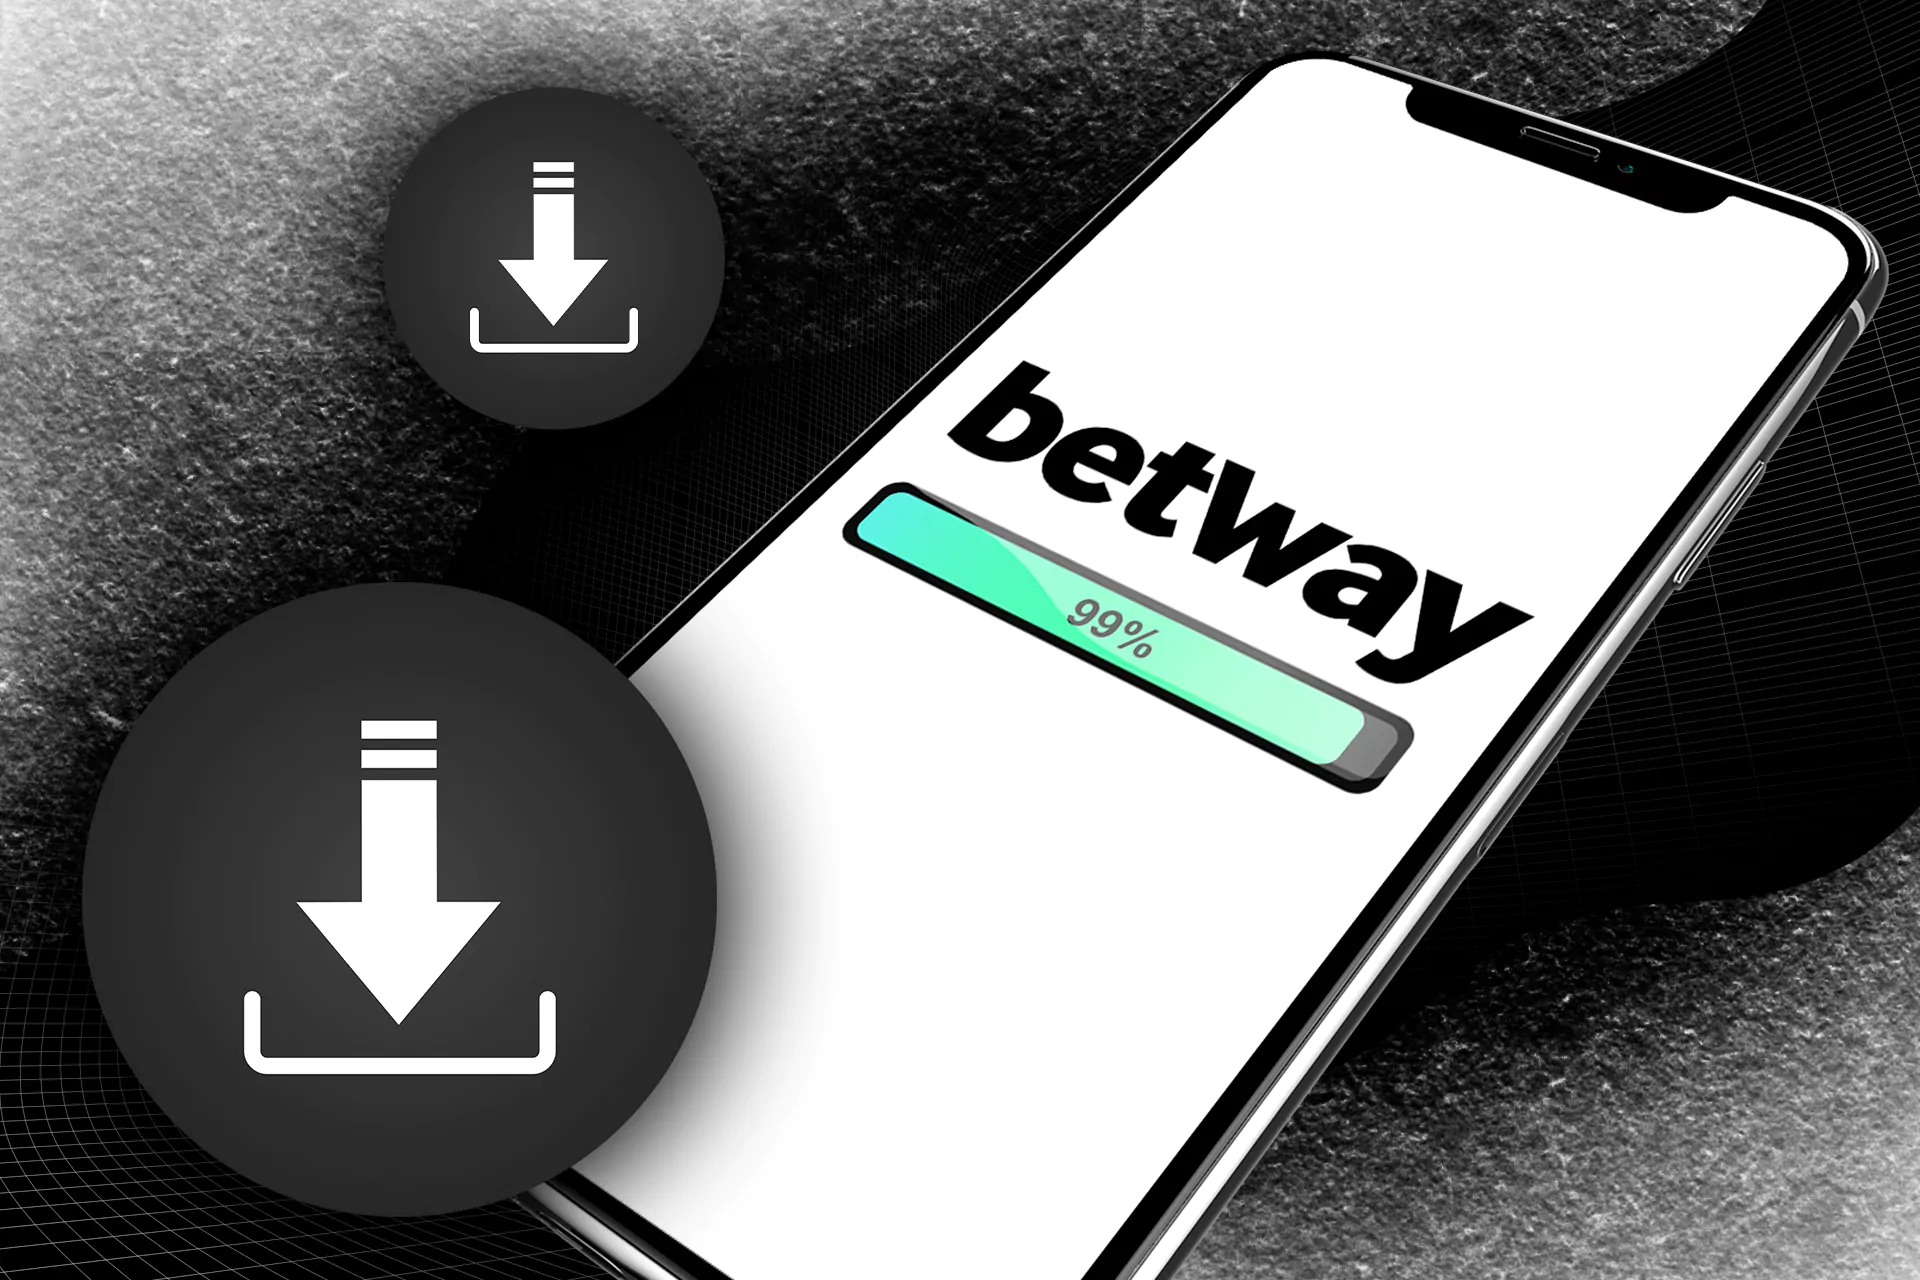 Install the Betway app and bet whenever you want.